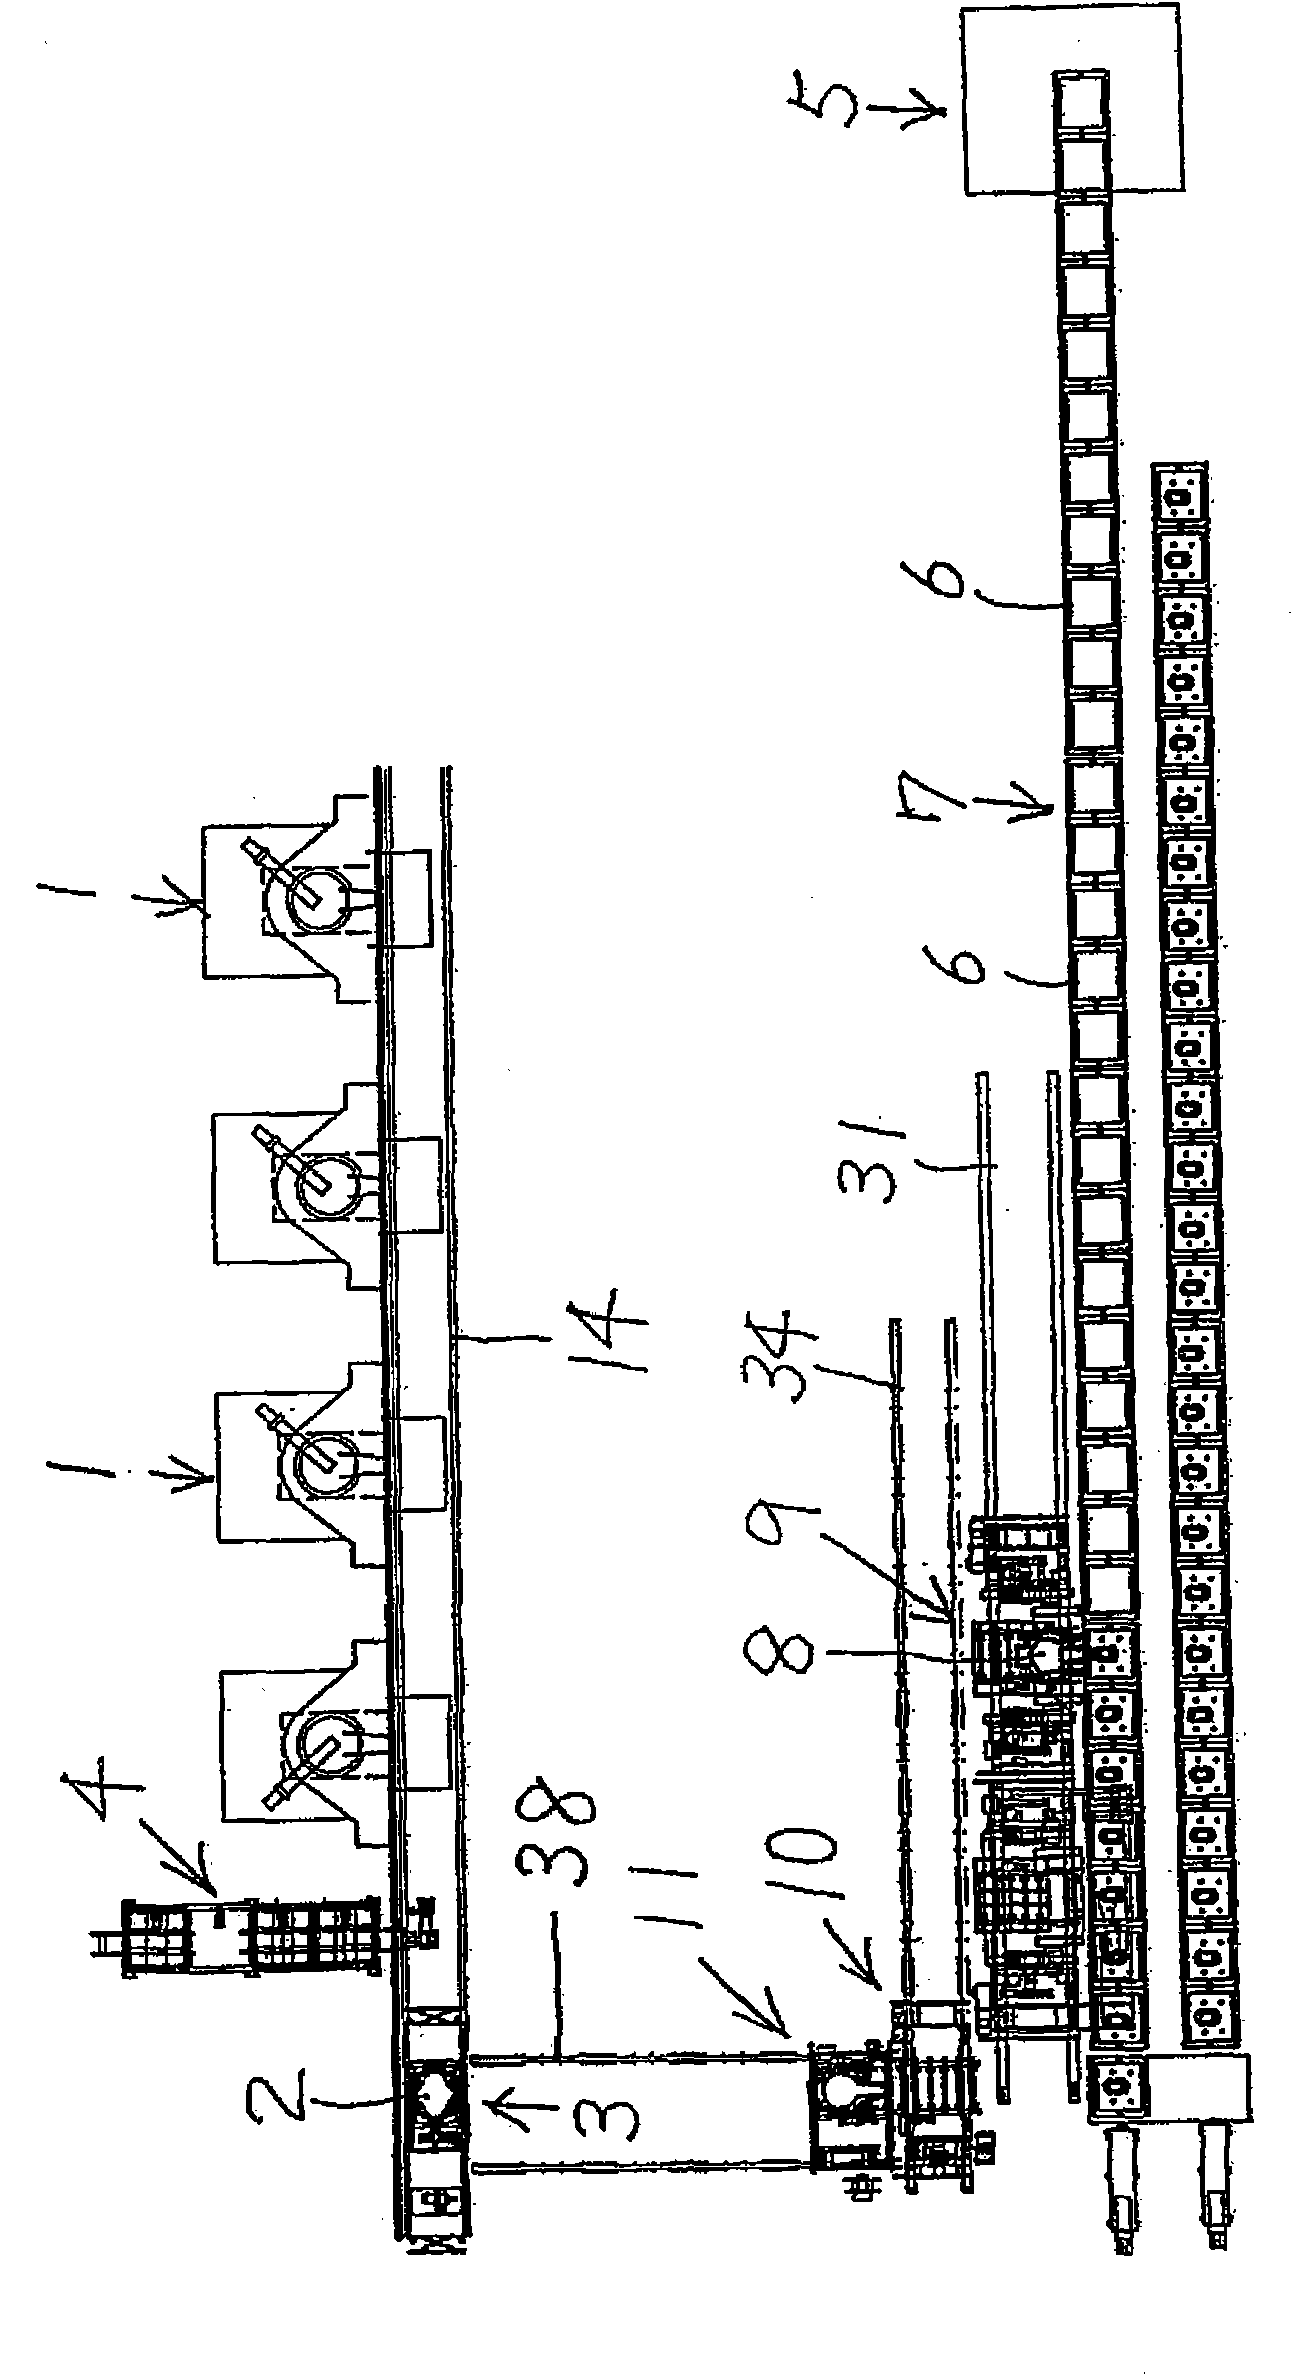 Method of supplying melting metal to the automatic pouring machine and device thereof